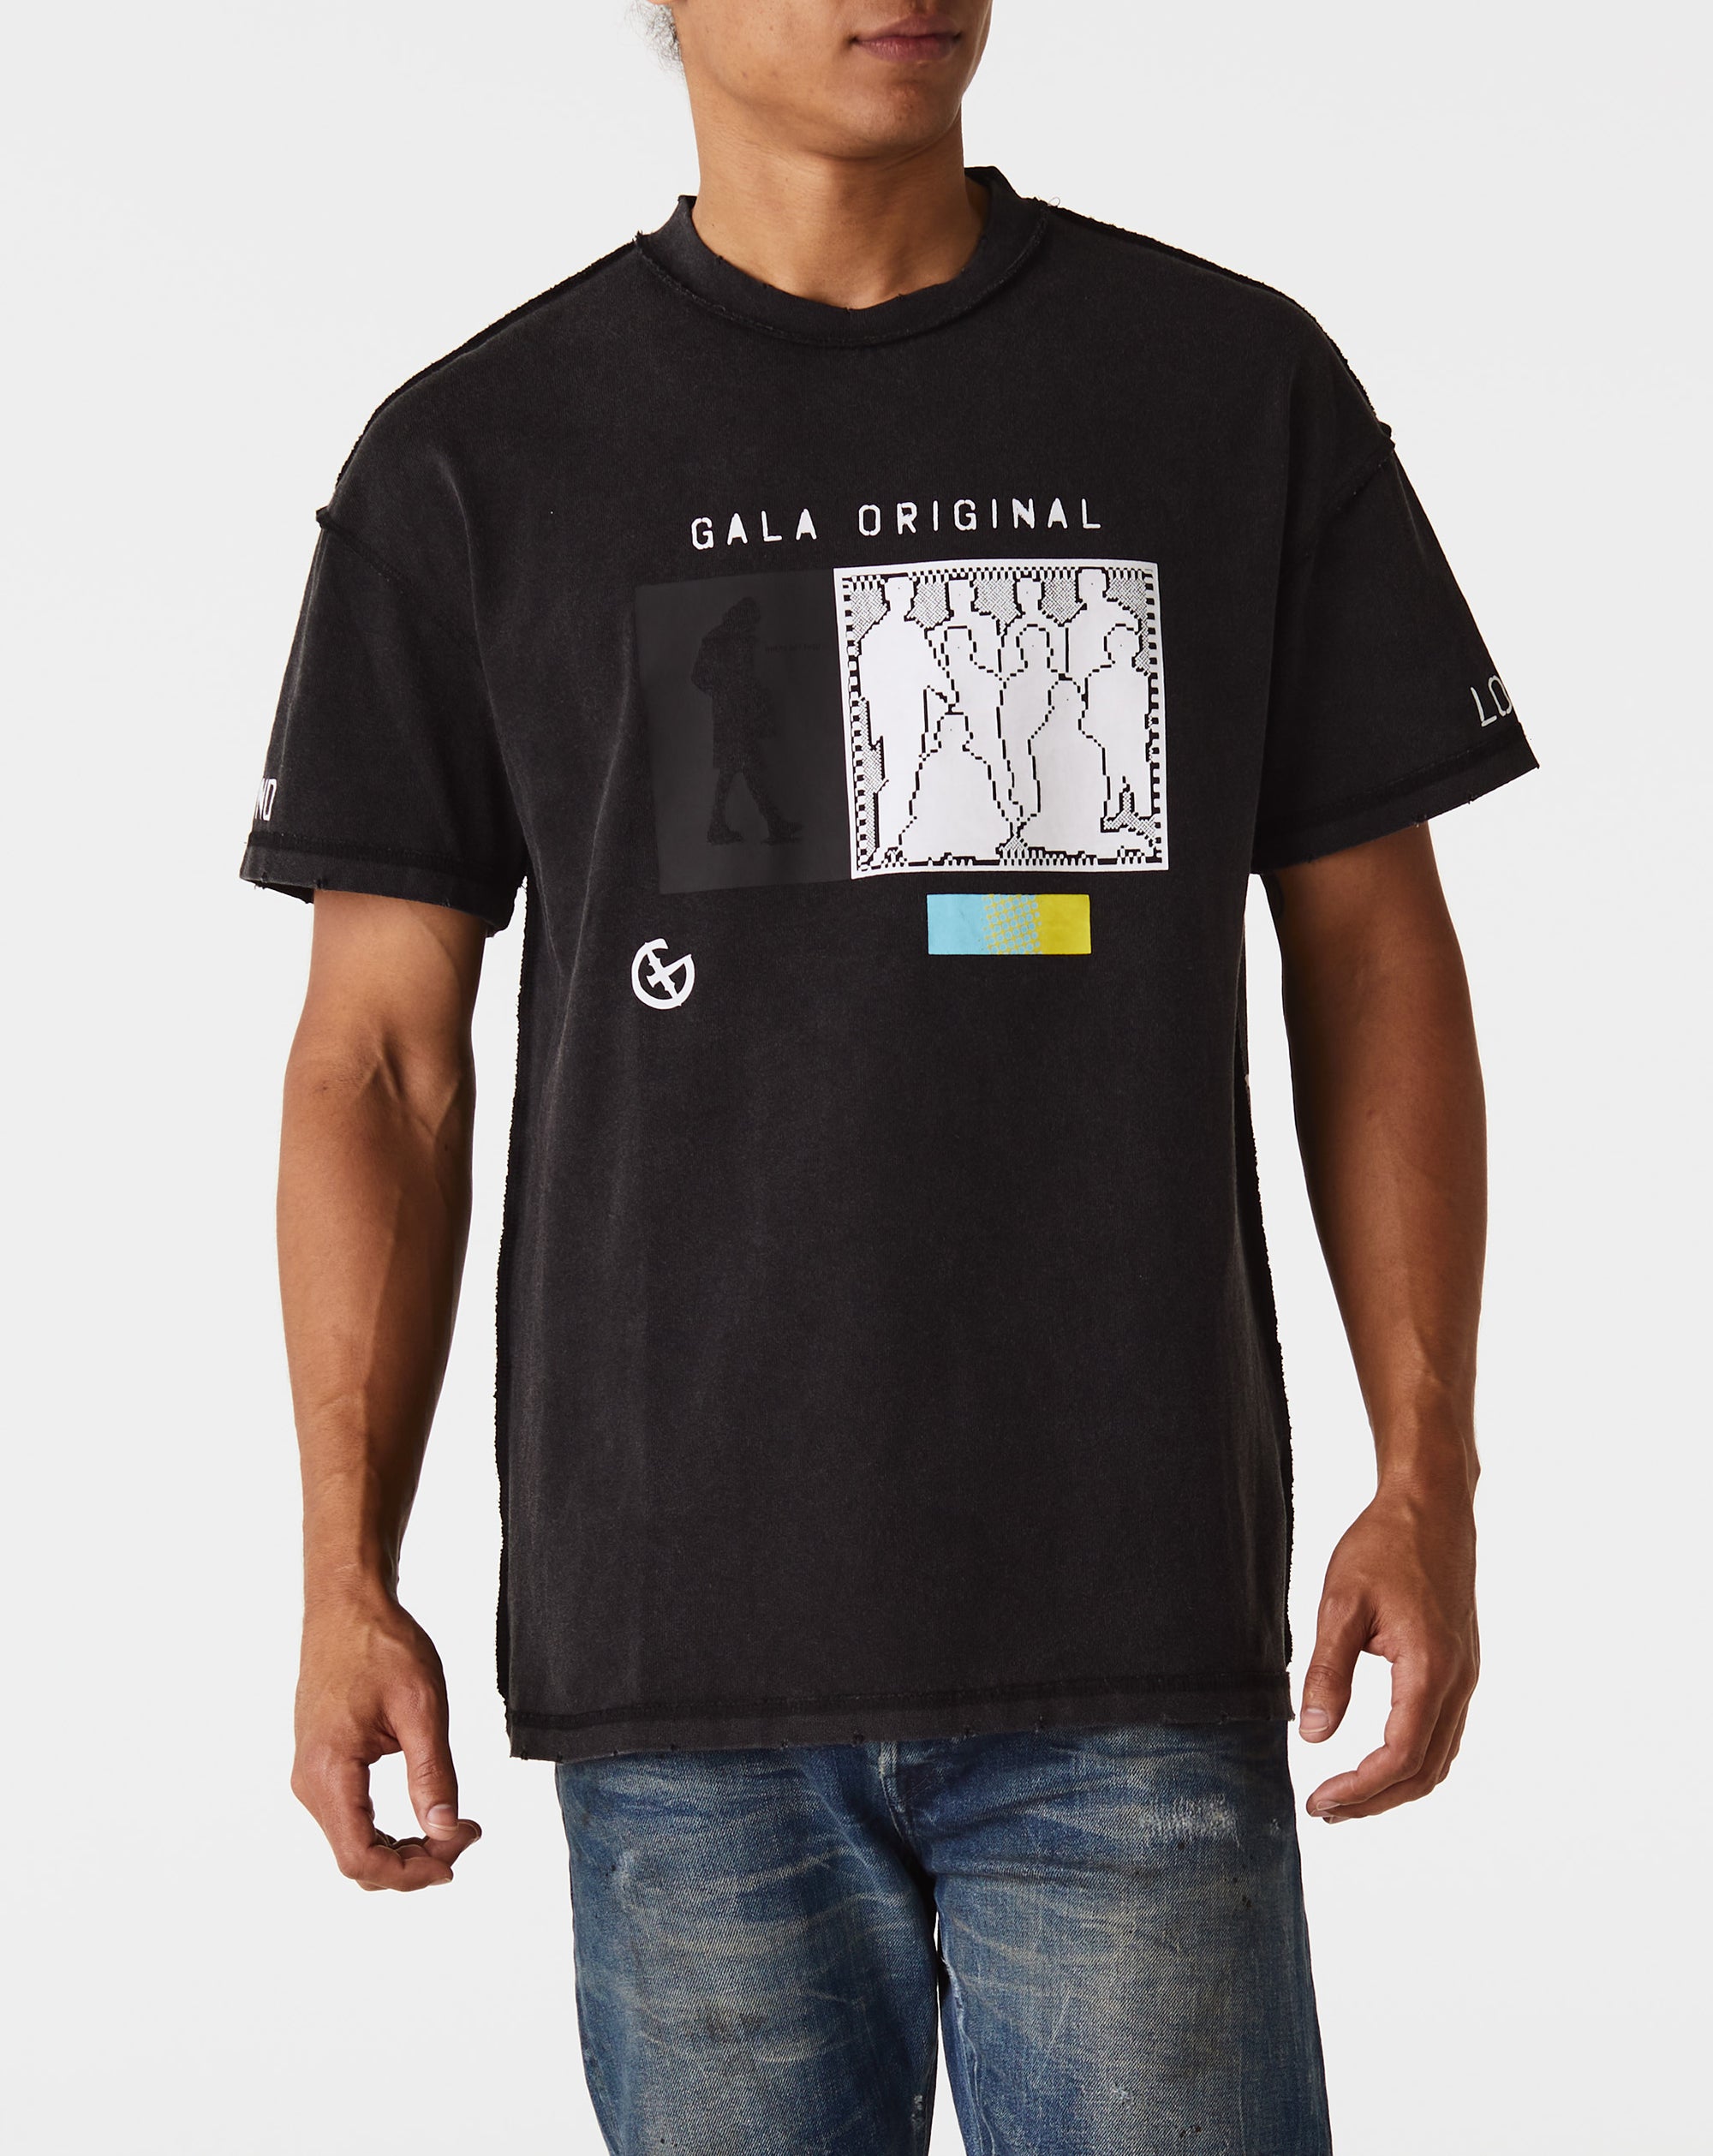 Gala Lost & Found T-Shirt - Rule of Next Apparel